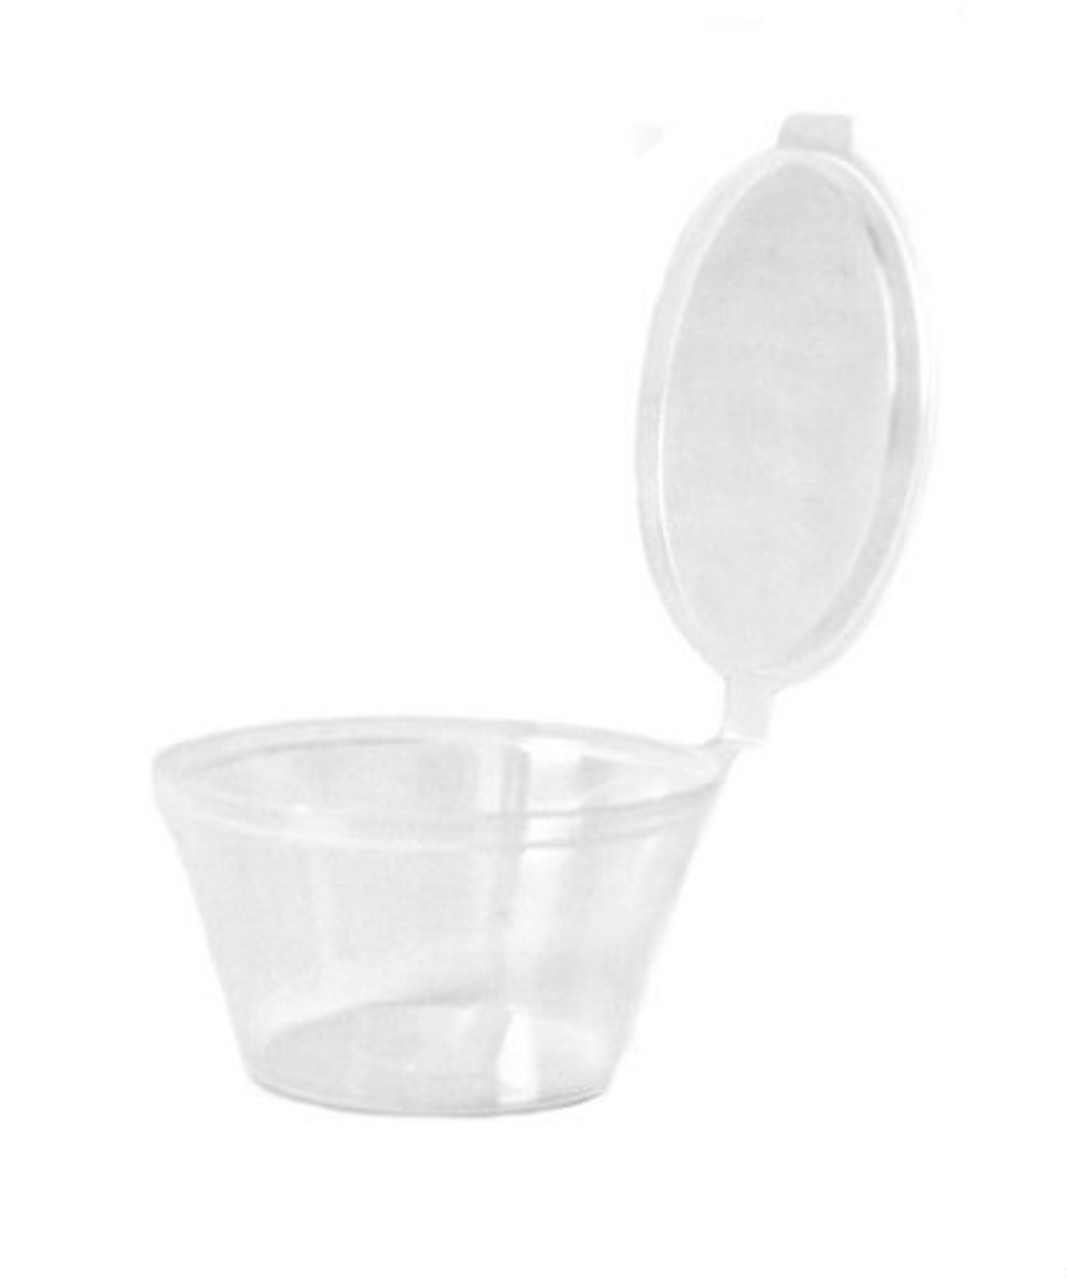 https://cdn11.bigcommerce.com/s-0evtp/images/stencil/1280x1280/products/2190/7216/Plastic_Round_1_Ounce_Clear_Sauce_Pot_Container__57275.1528274566.jpg?c=2&imbypass=on